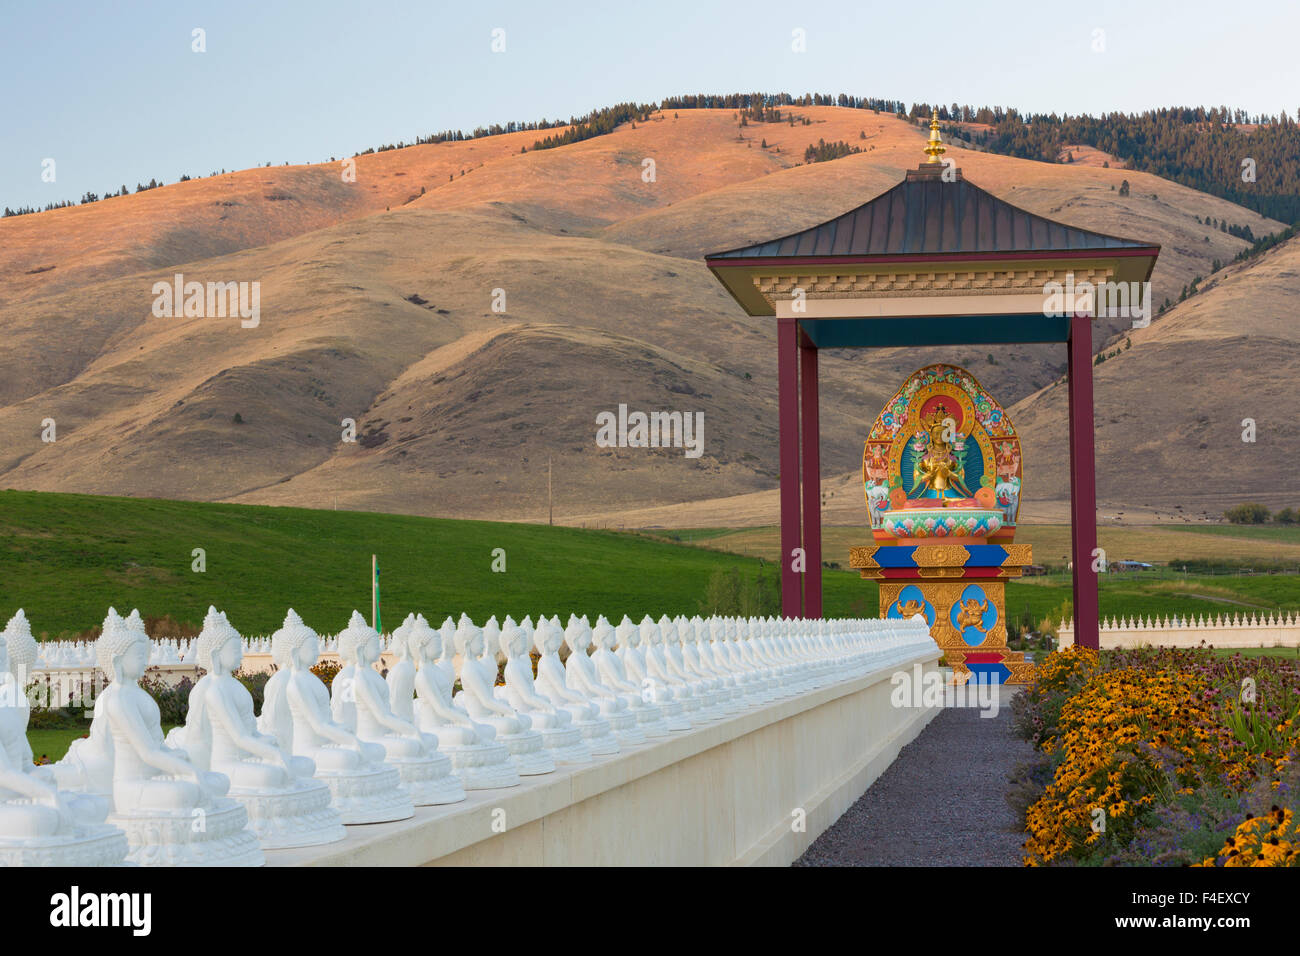 Usa Montana Arlee Pagoda And Statues In Garden Of One Thousand